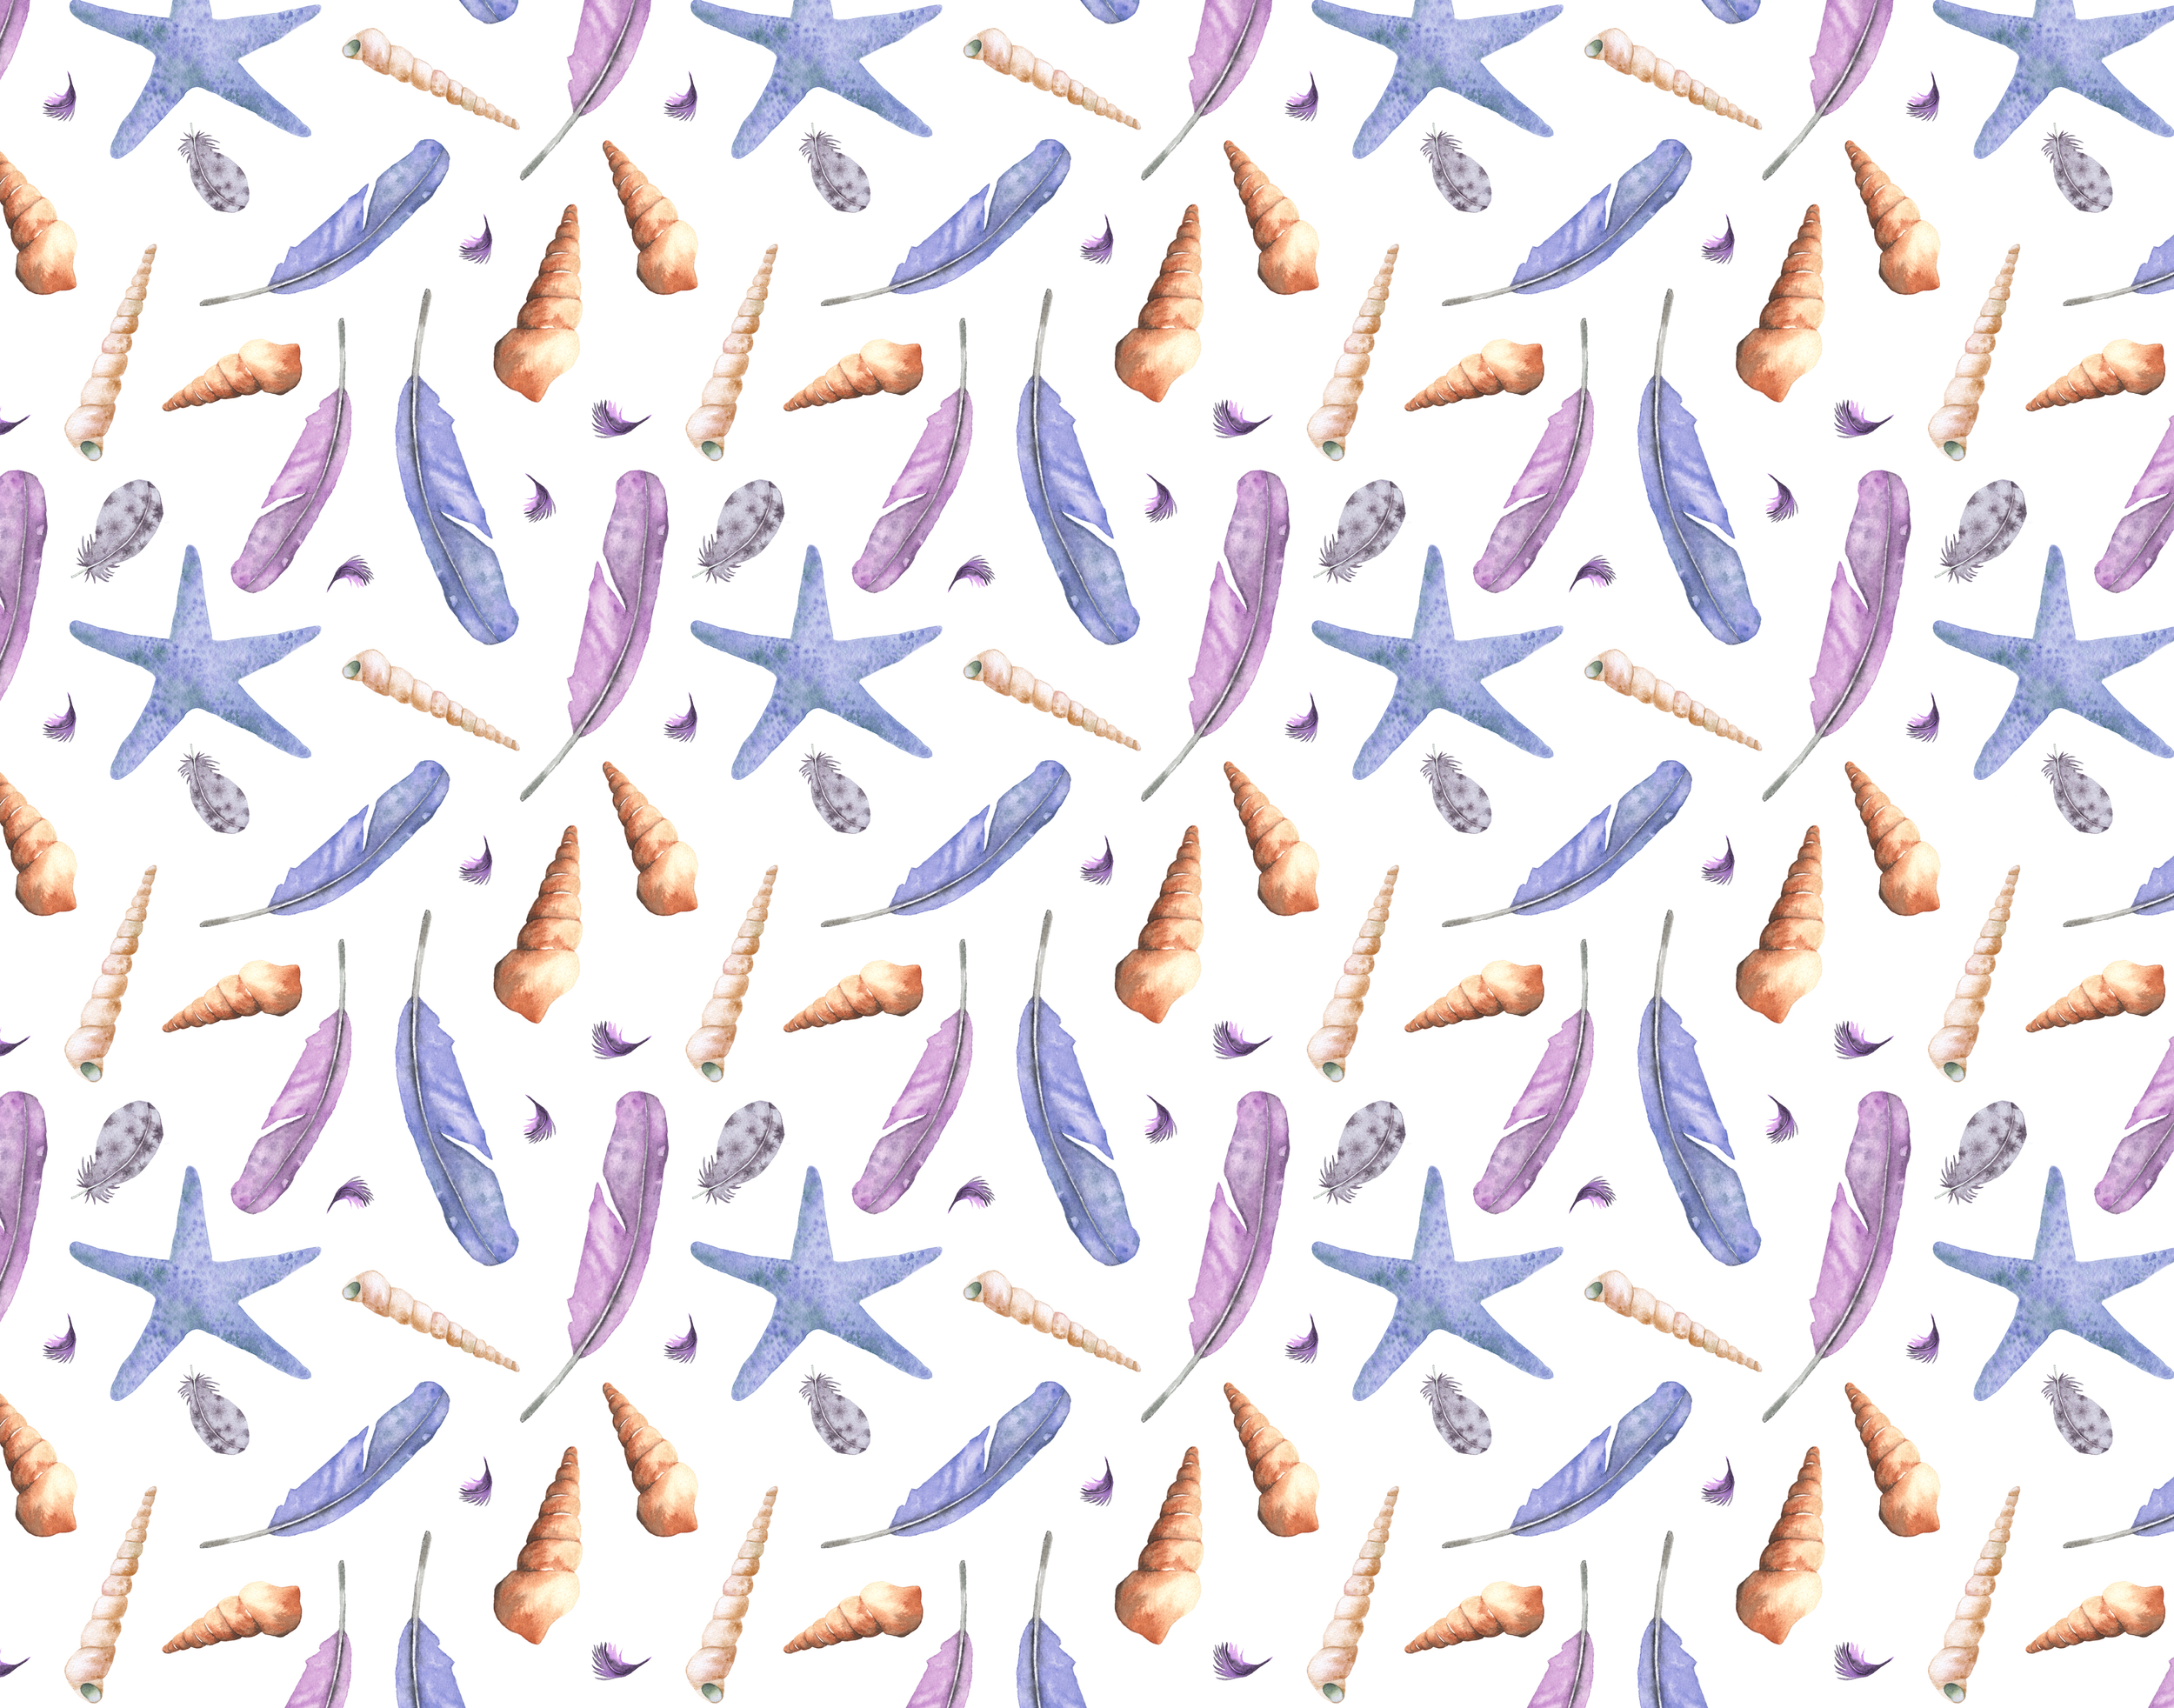 Feather and shell pattern 1.jpg